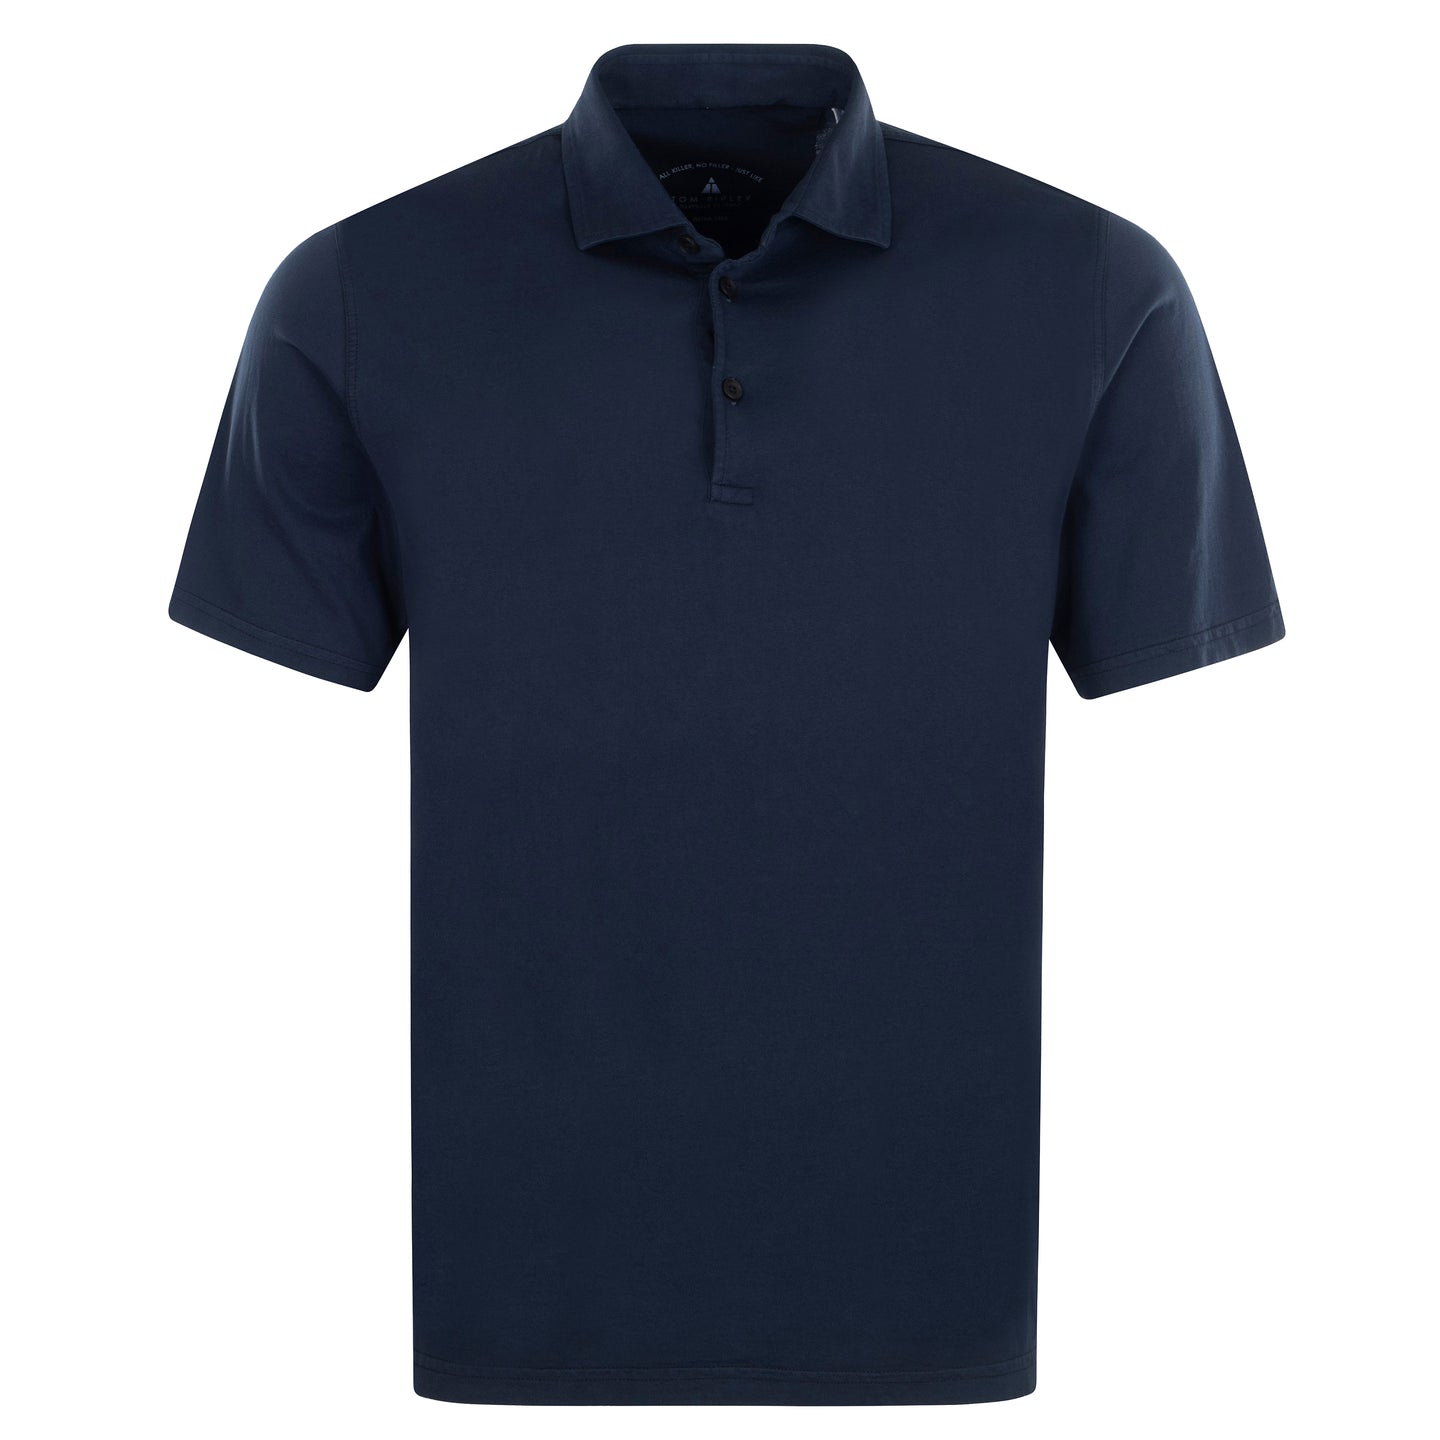 Essential jersey polo shirt Supima® cotton ANDREW